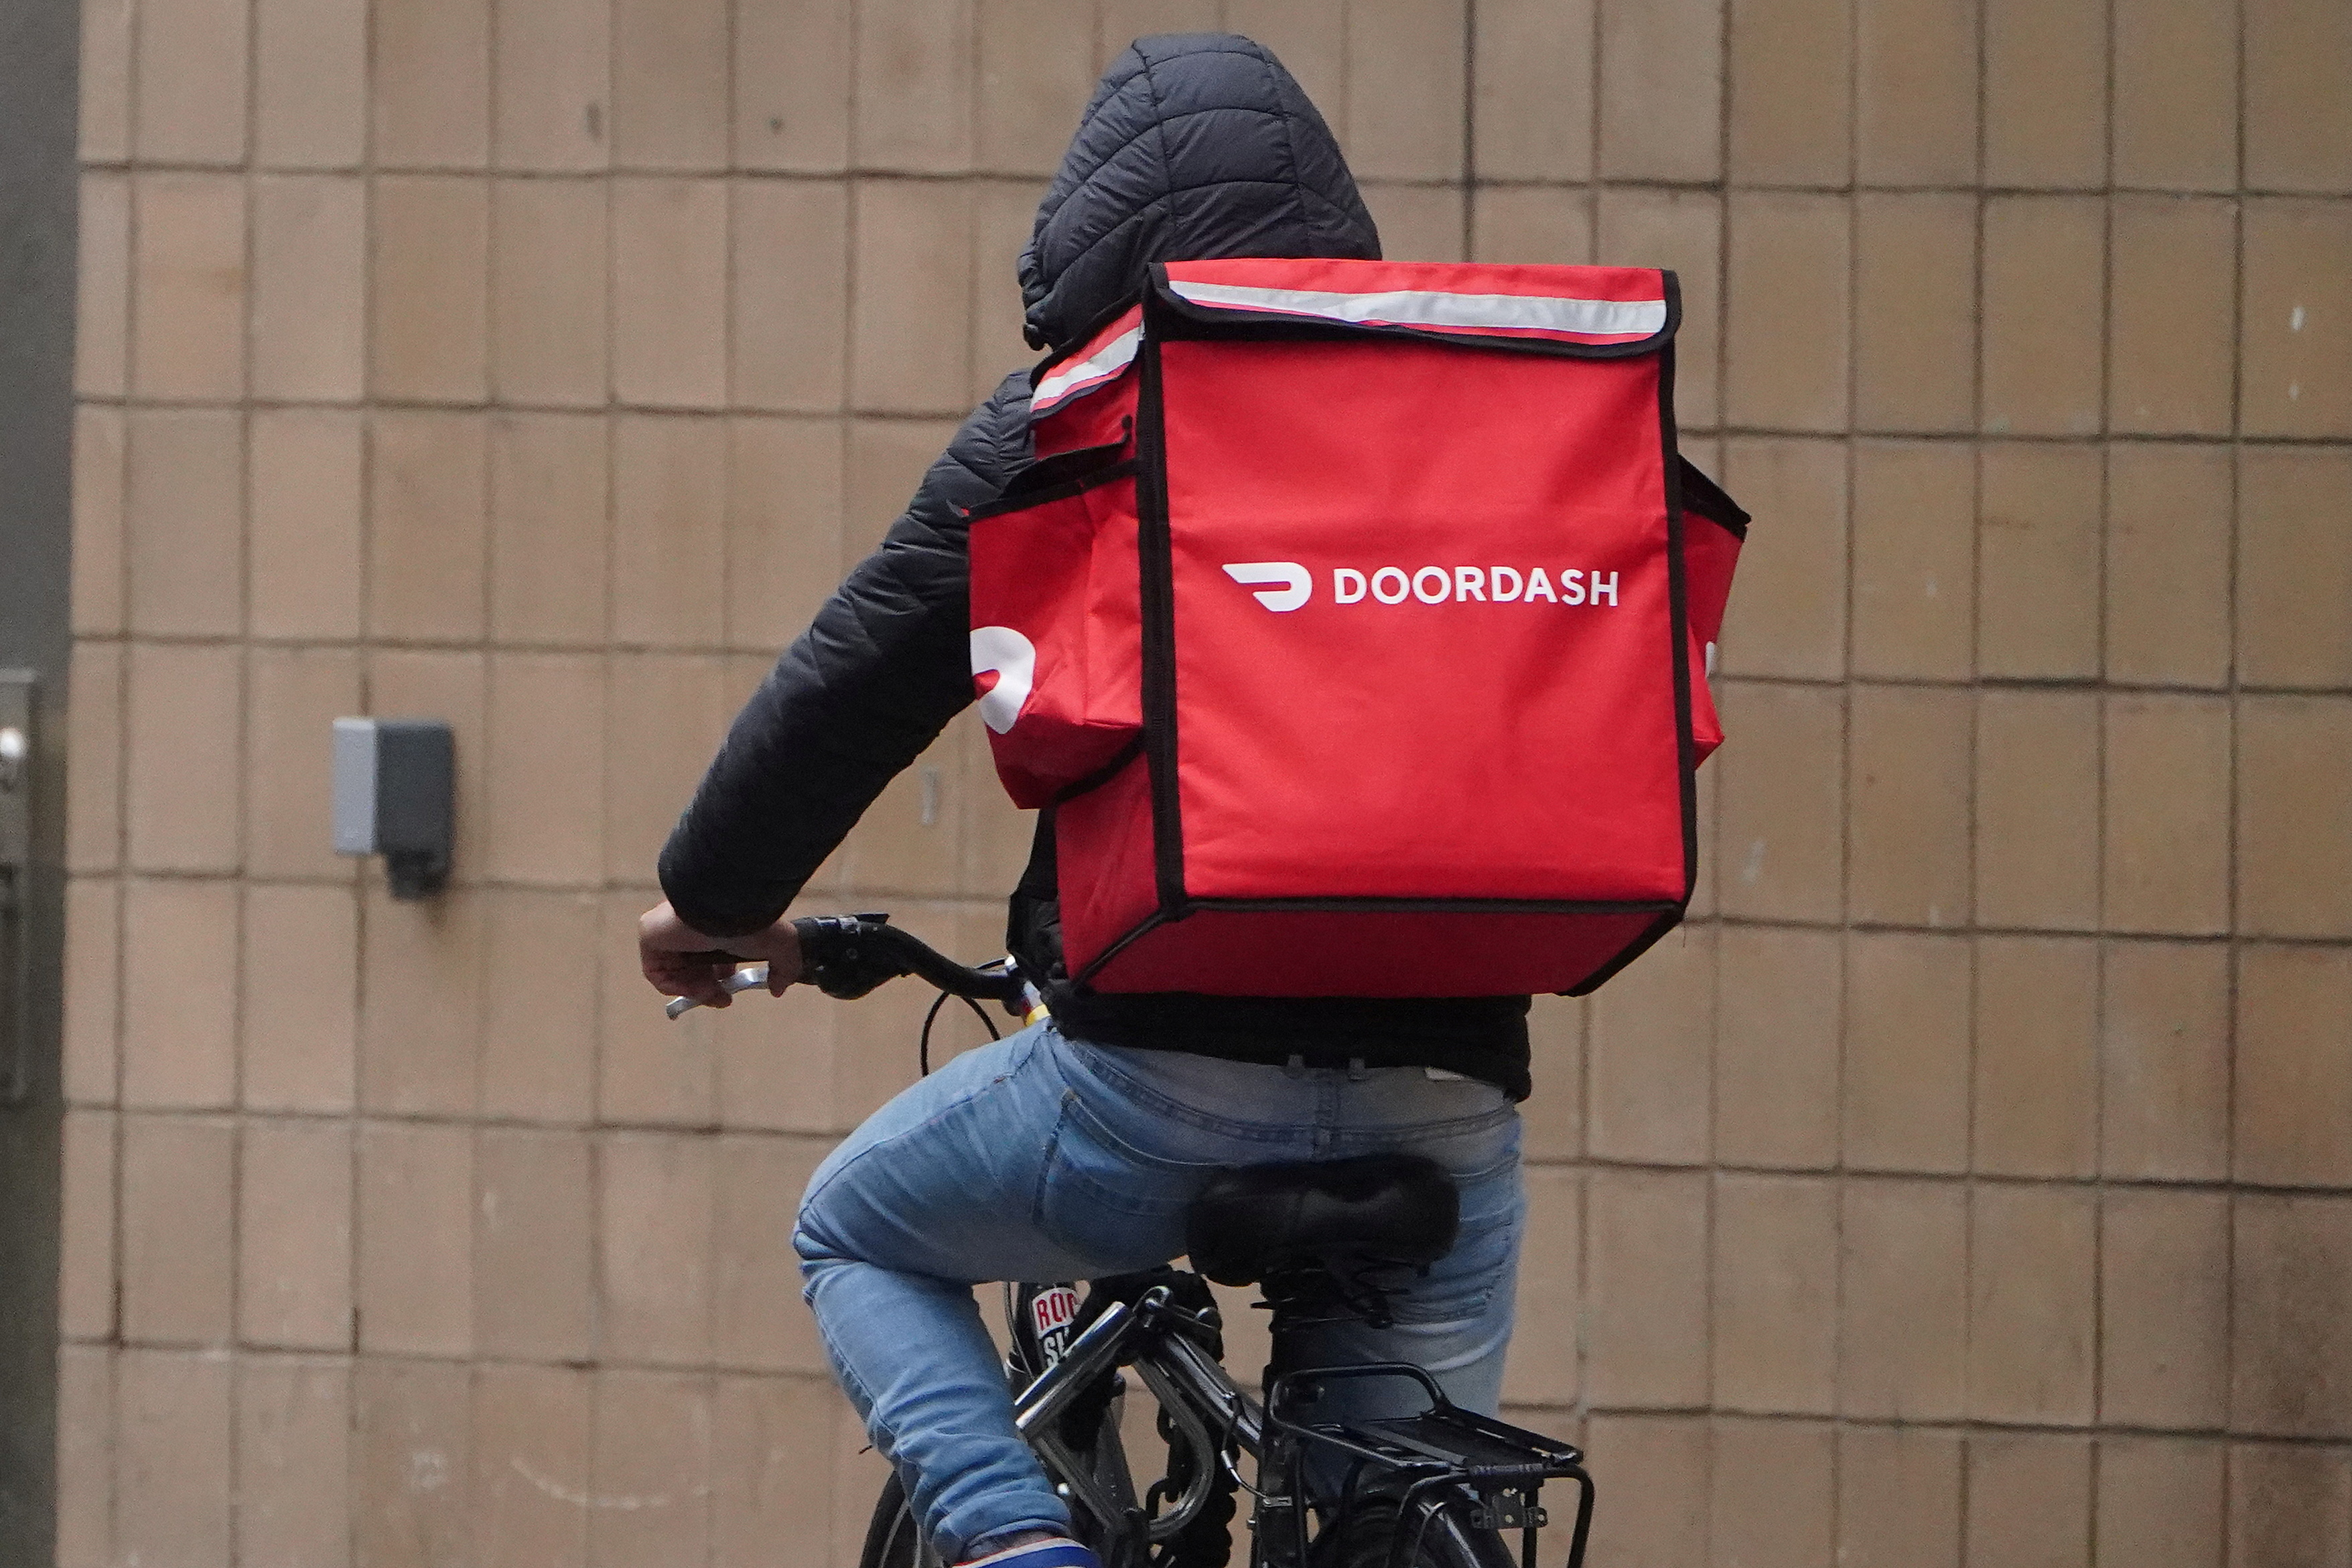 A delivery person for Doordash rides his bike in the rain in the Manhattan borough of New York City